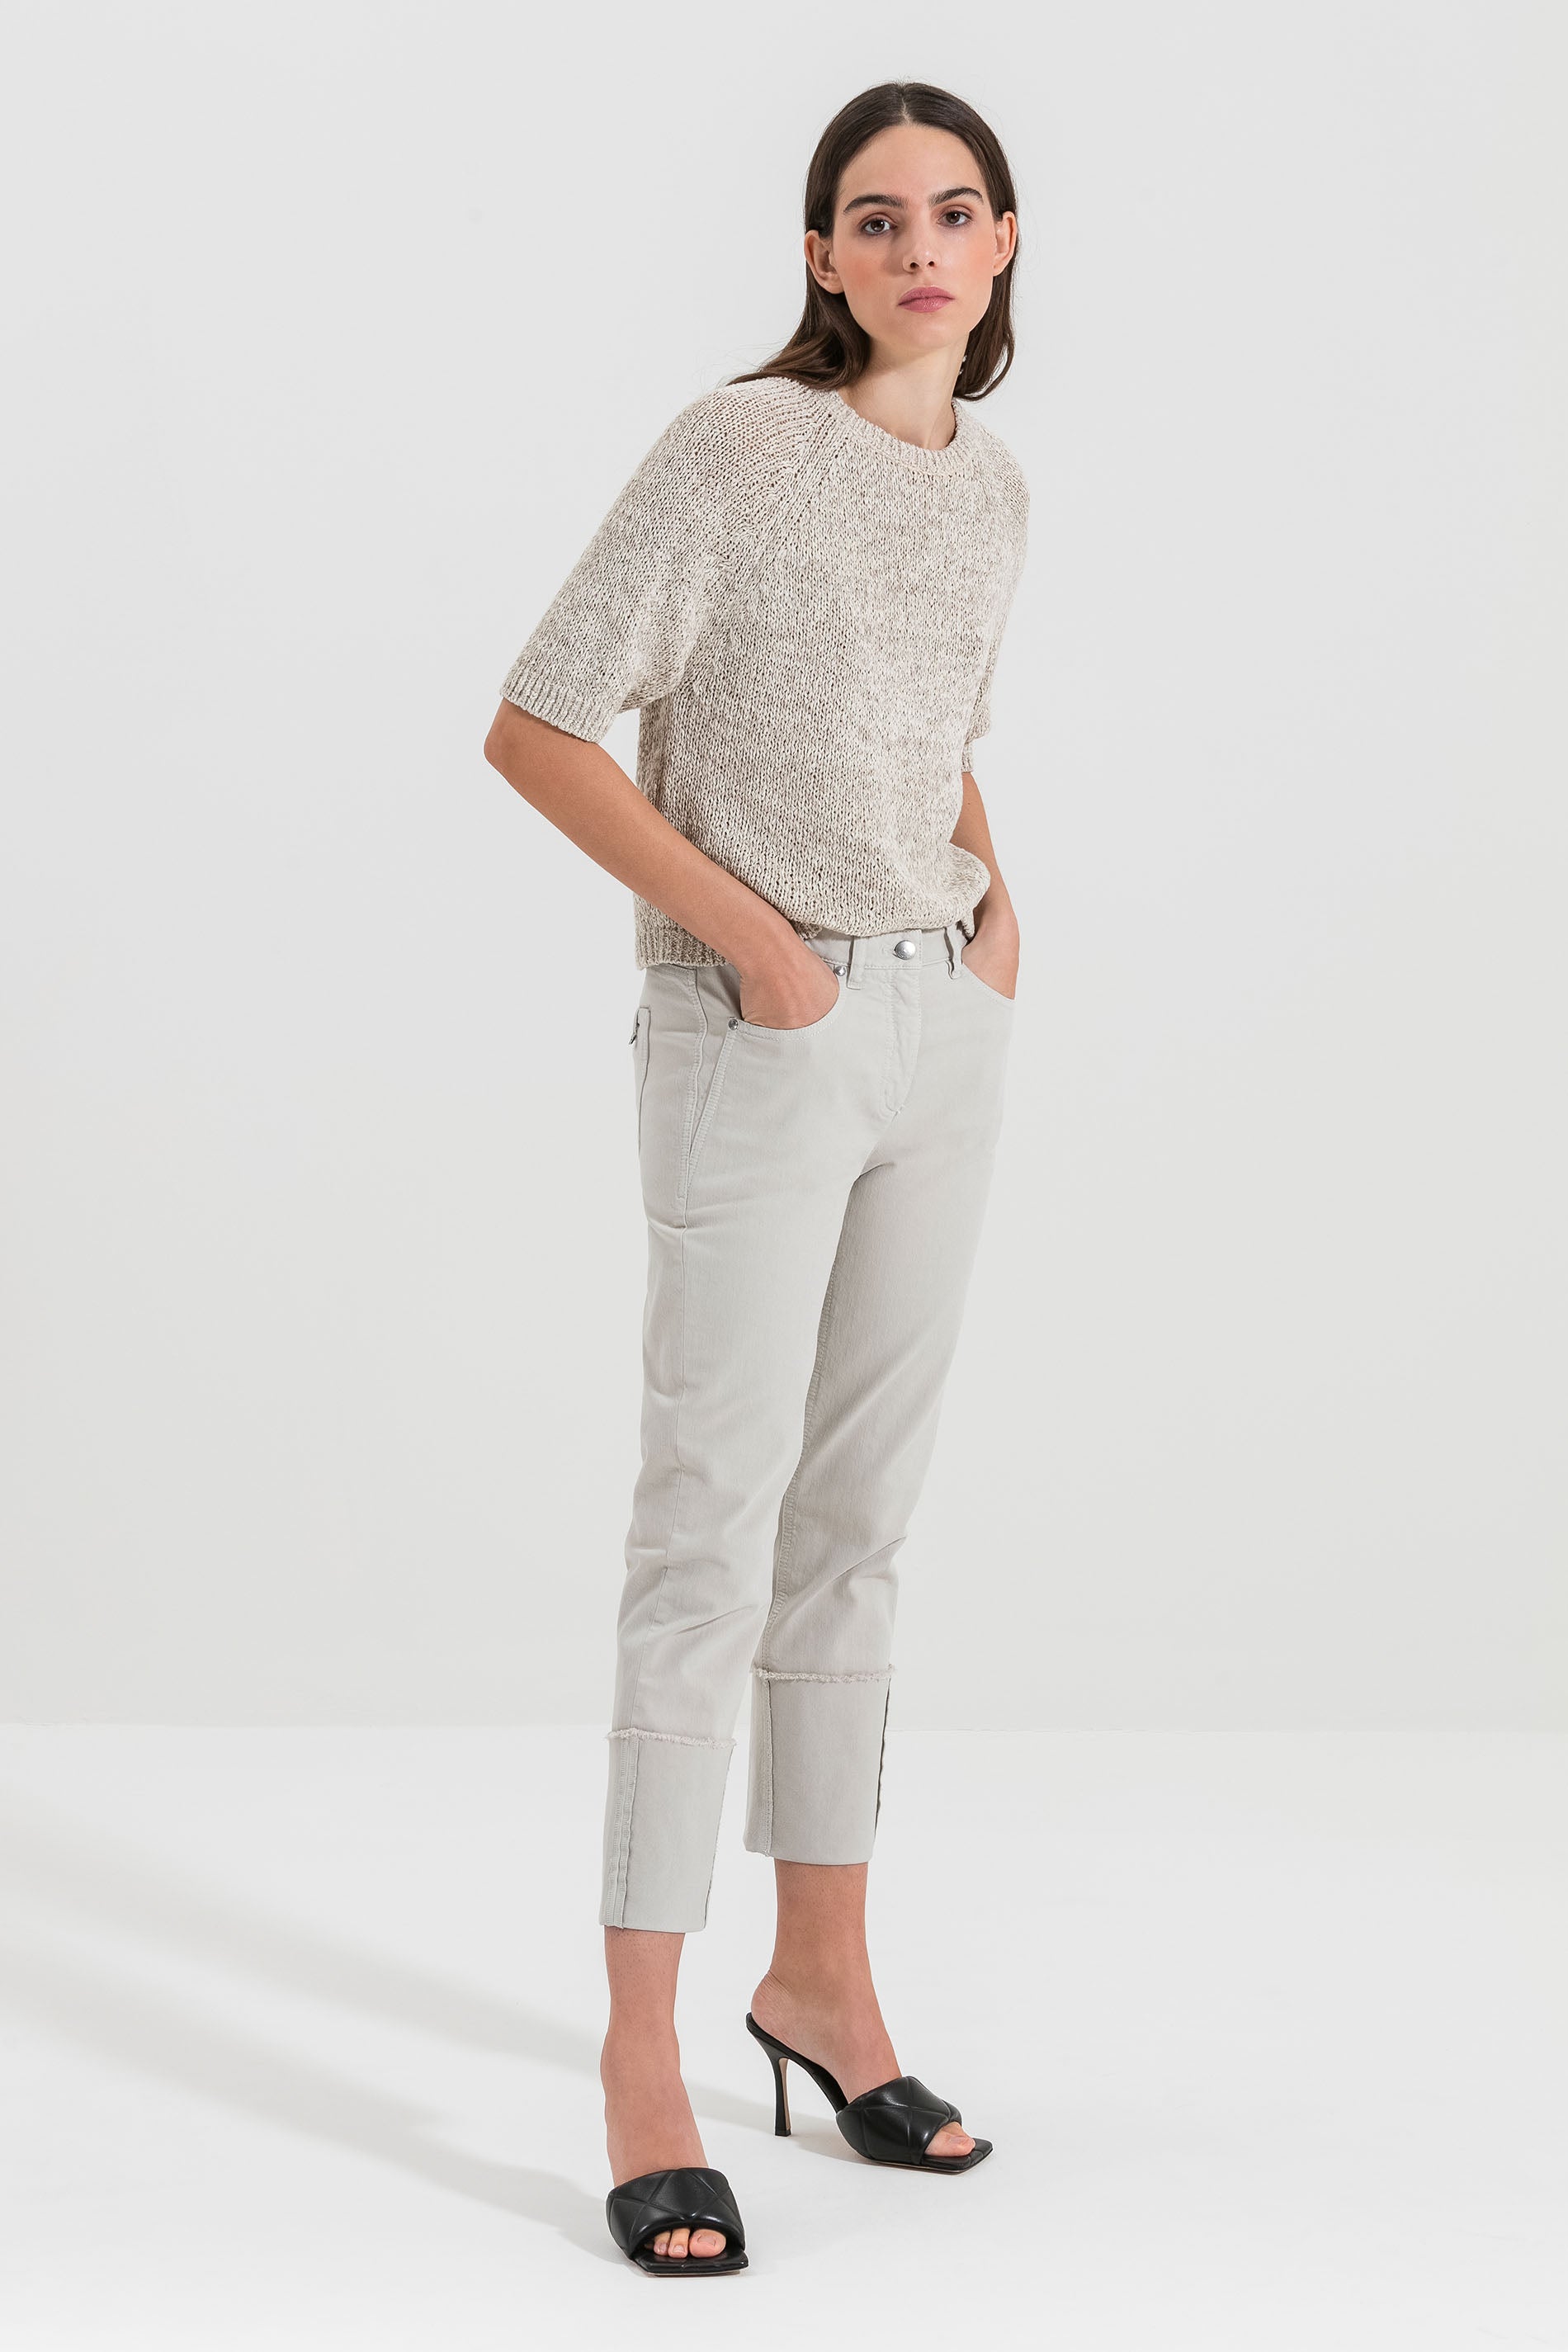 LUISA CERANO-OUTLET-SALE-Strick-Shirt in Two-Tone-Optik-Strick-by-ARCHIVIST